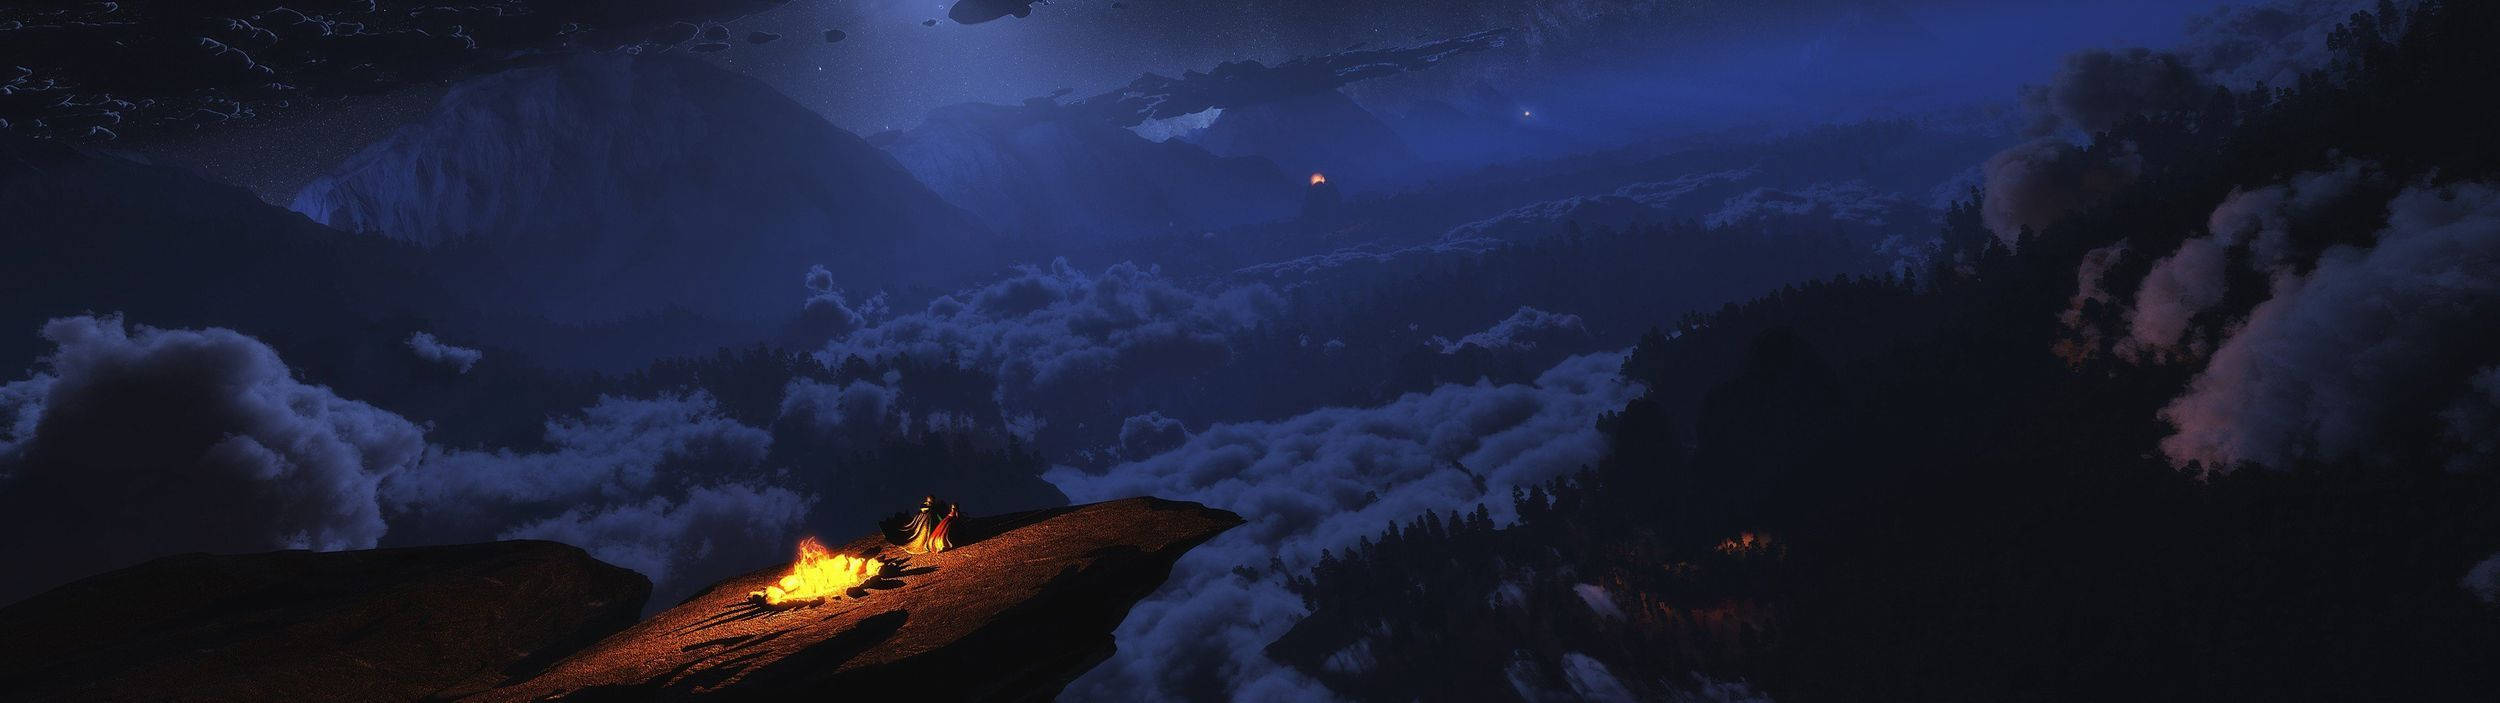 Ultrawide clouds during the night wit a camping fire on the rock edge.